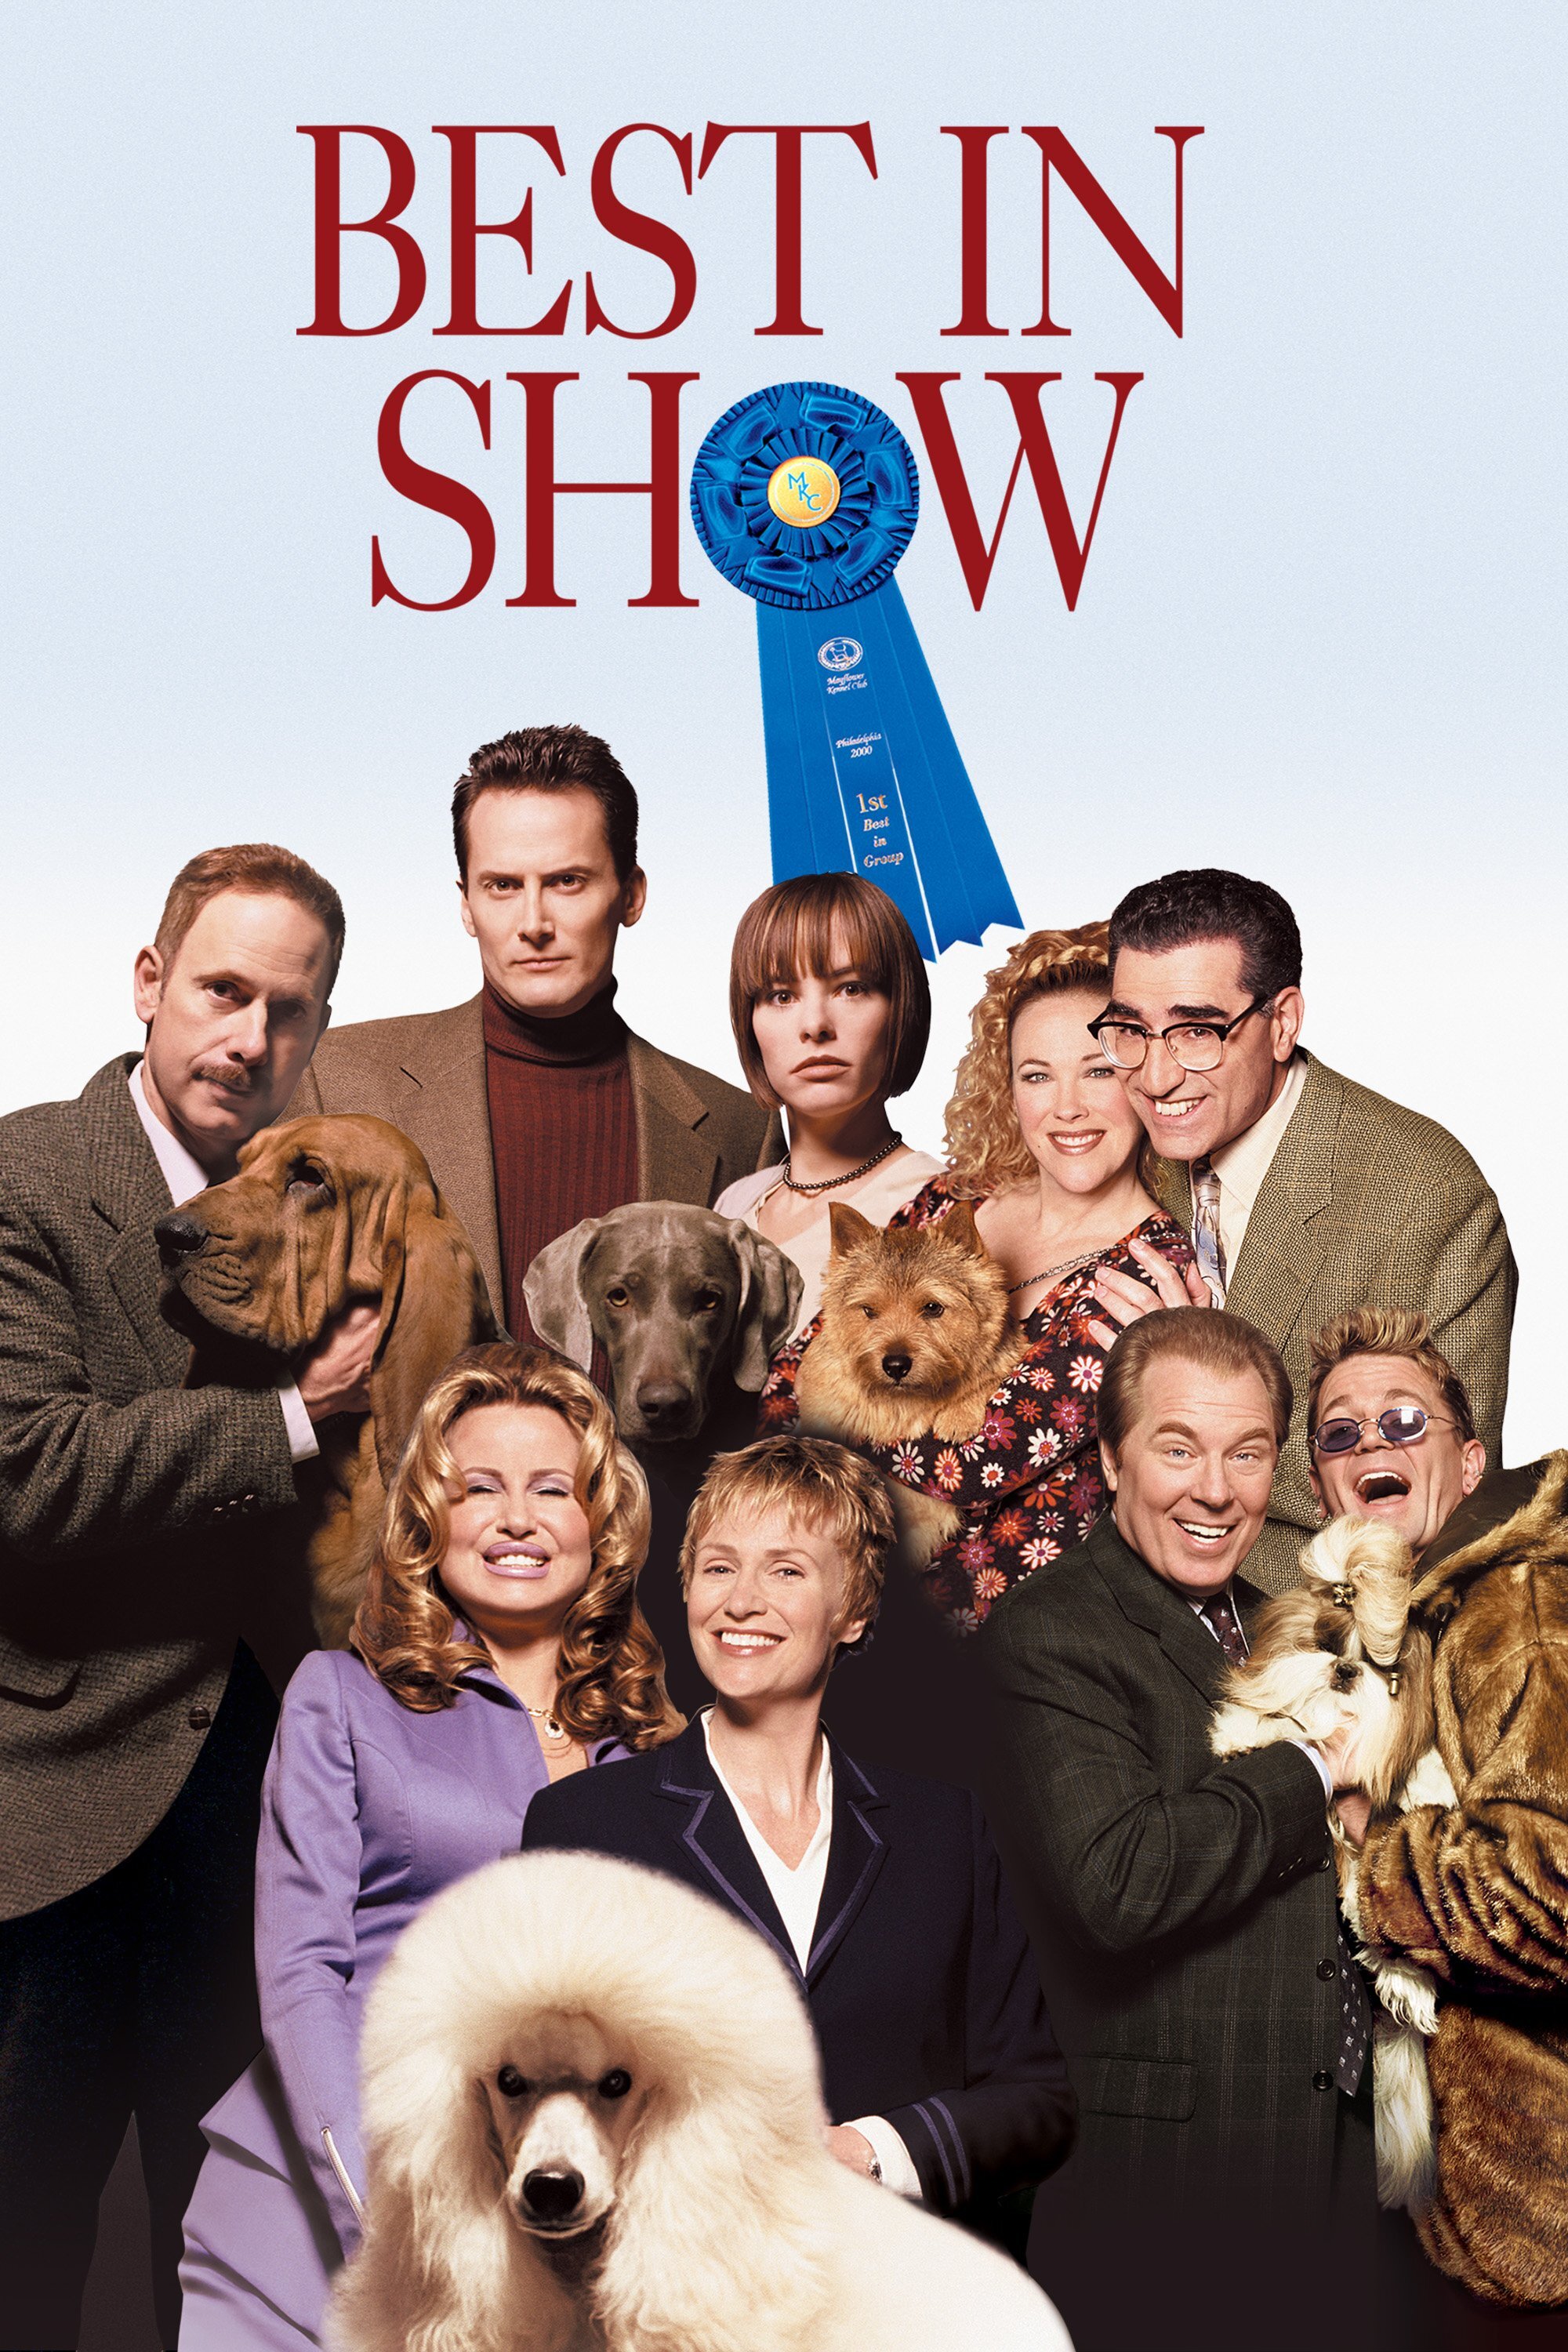 Best In Show - DVD [ 2000 ]  - Comedy Movies On DVD - Movies On GRUV